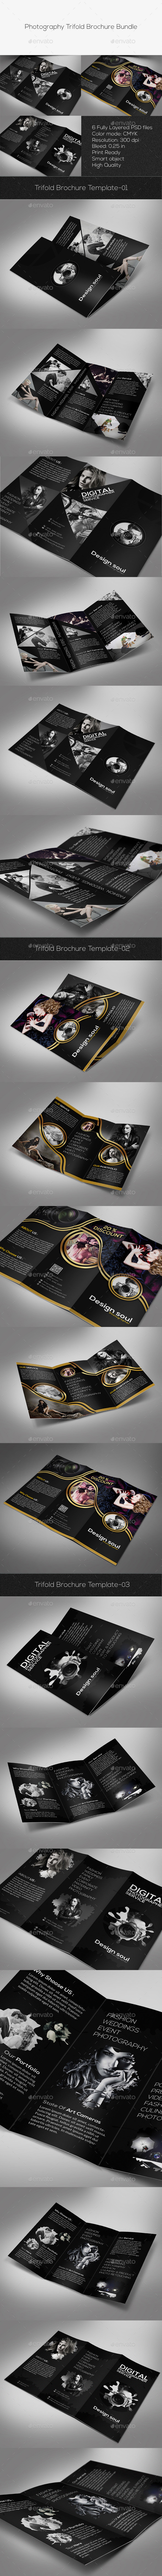 Photography trifold brochure bundle preview